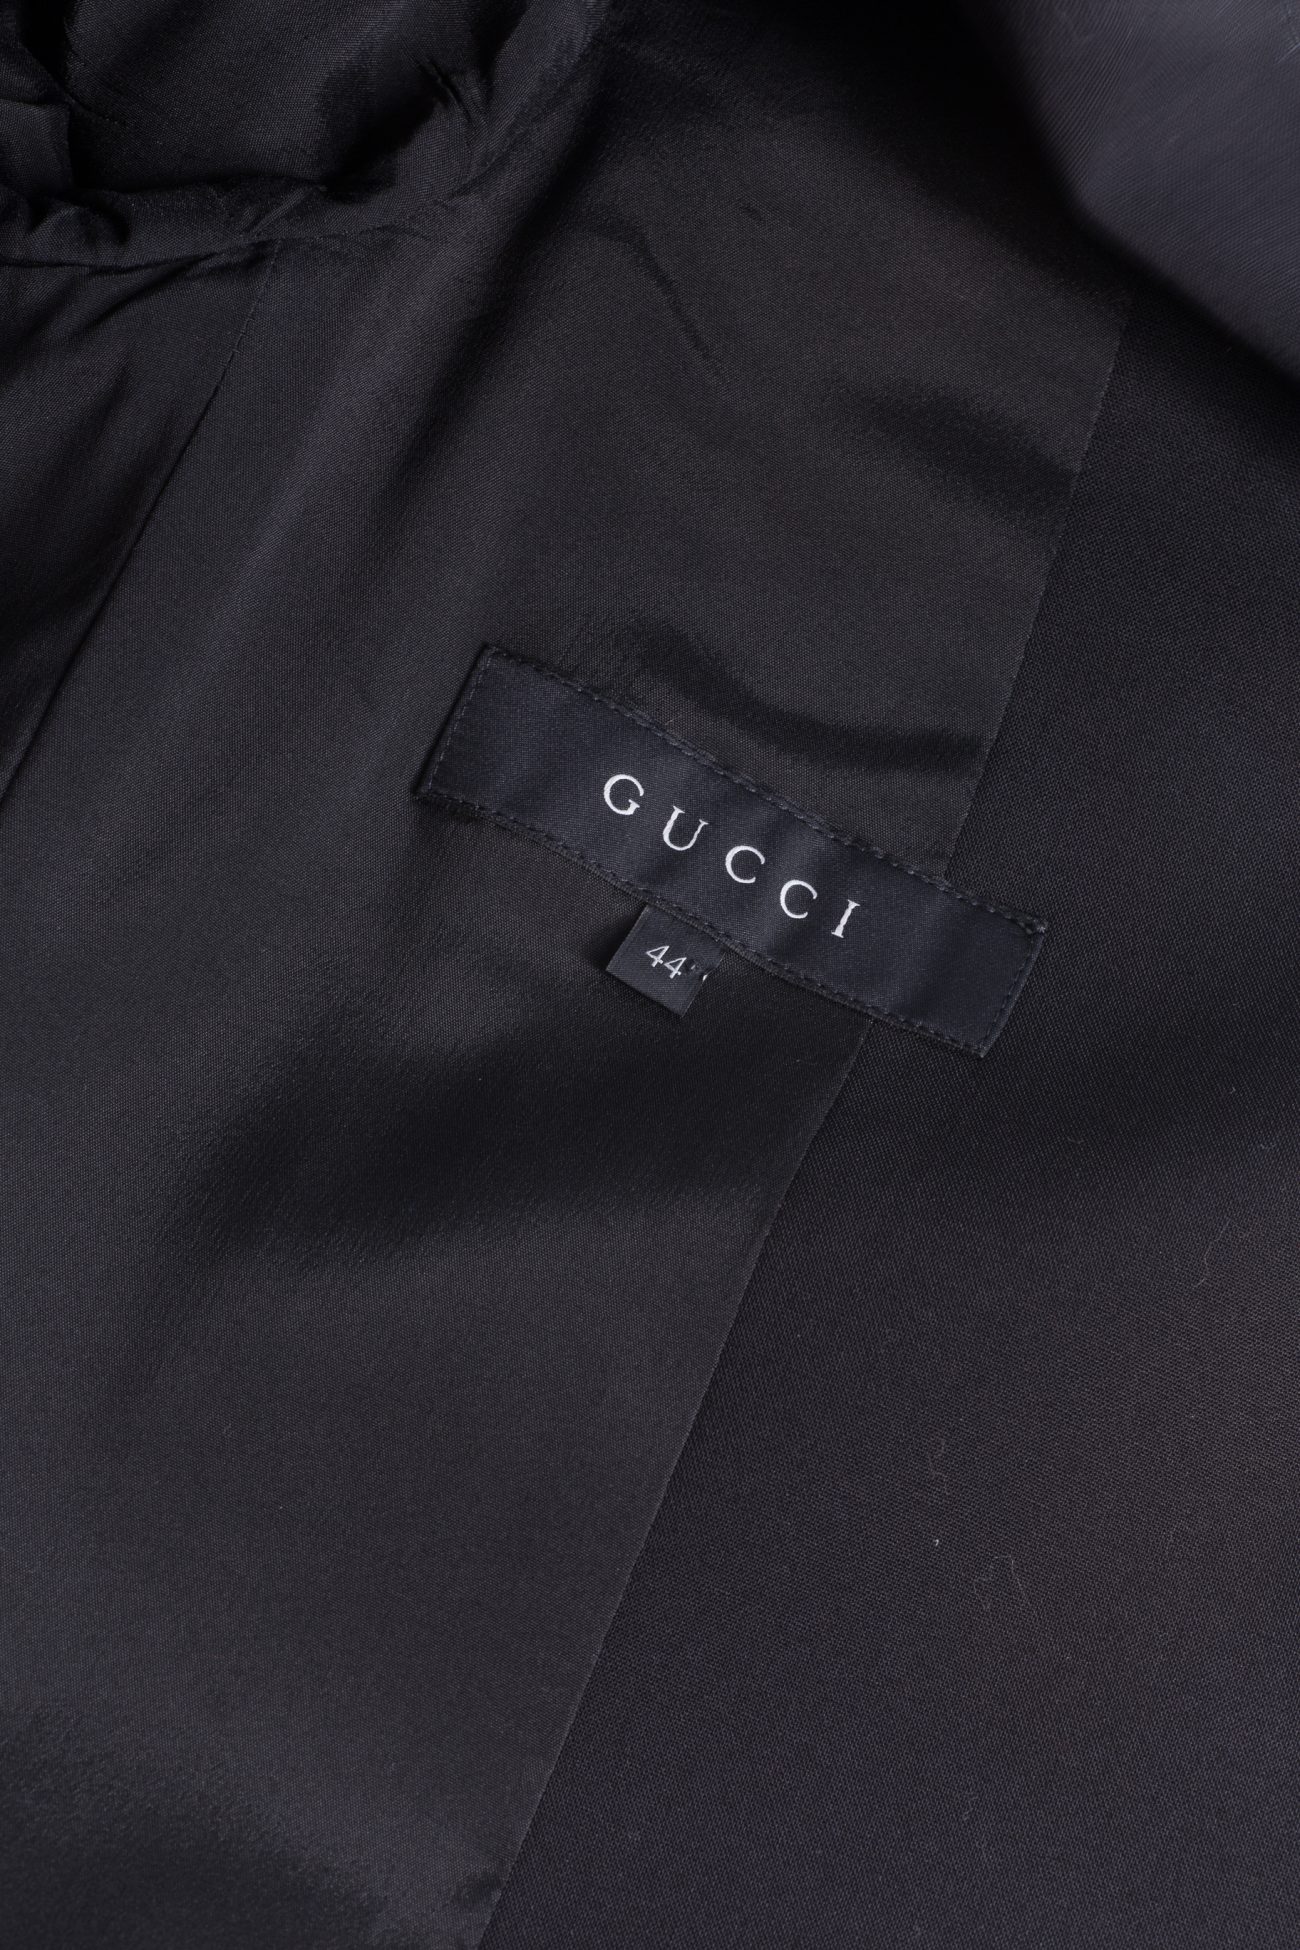 Gucci belted jacket